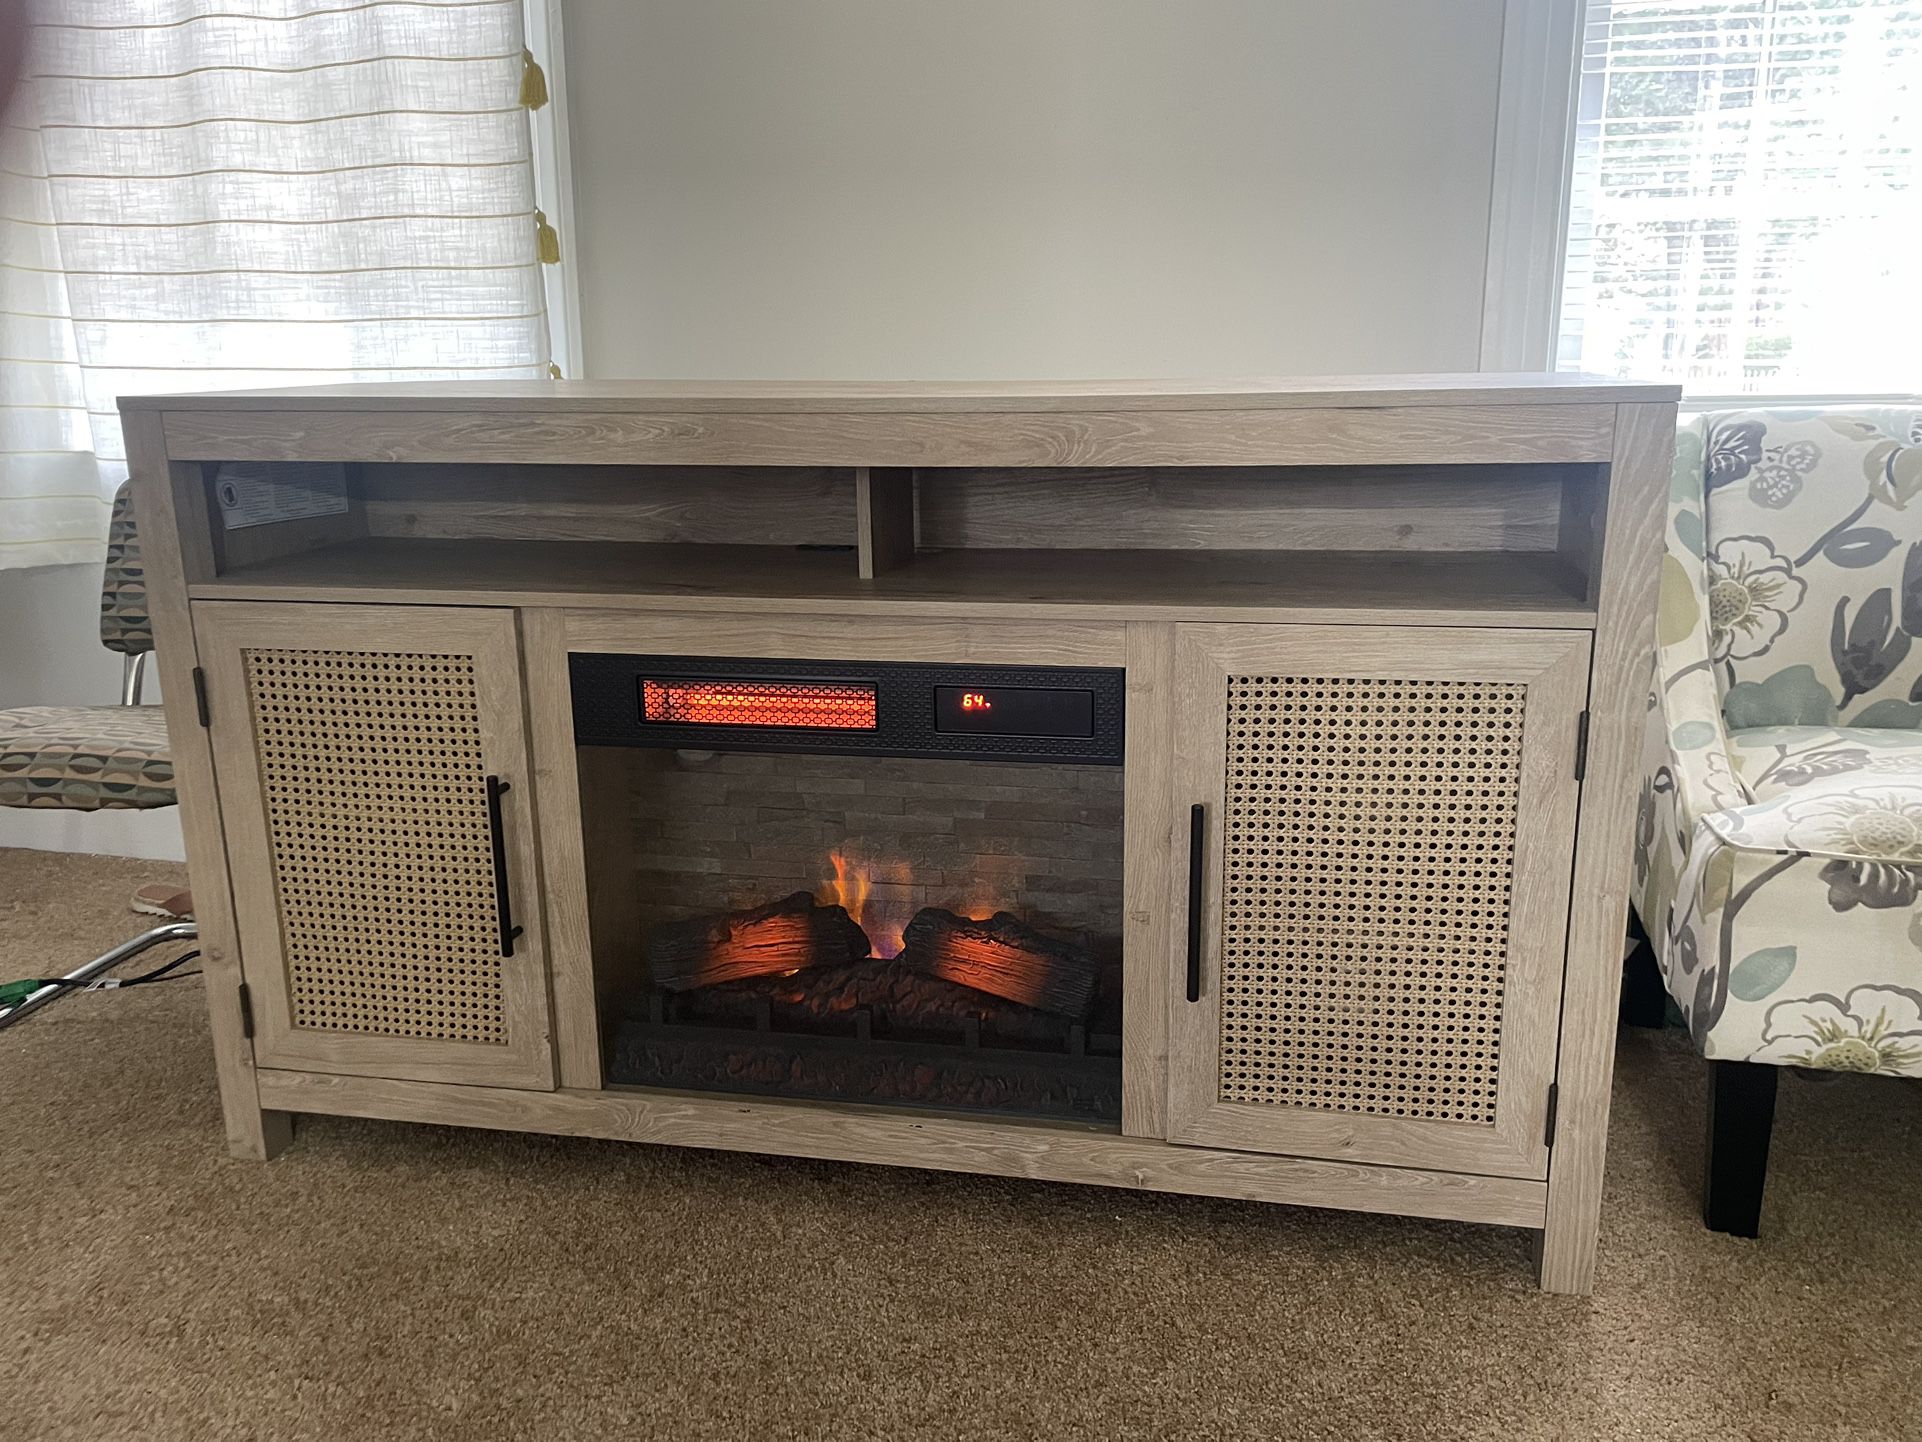 Electric Fire Place/TV stand